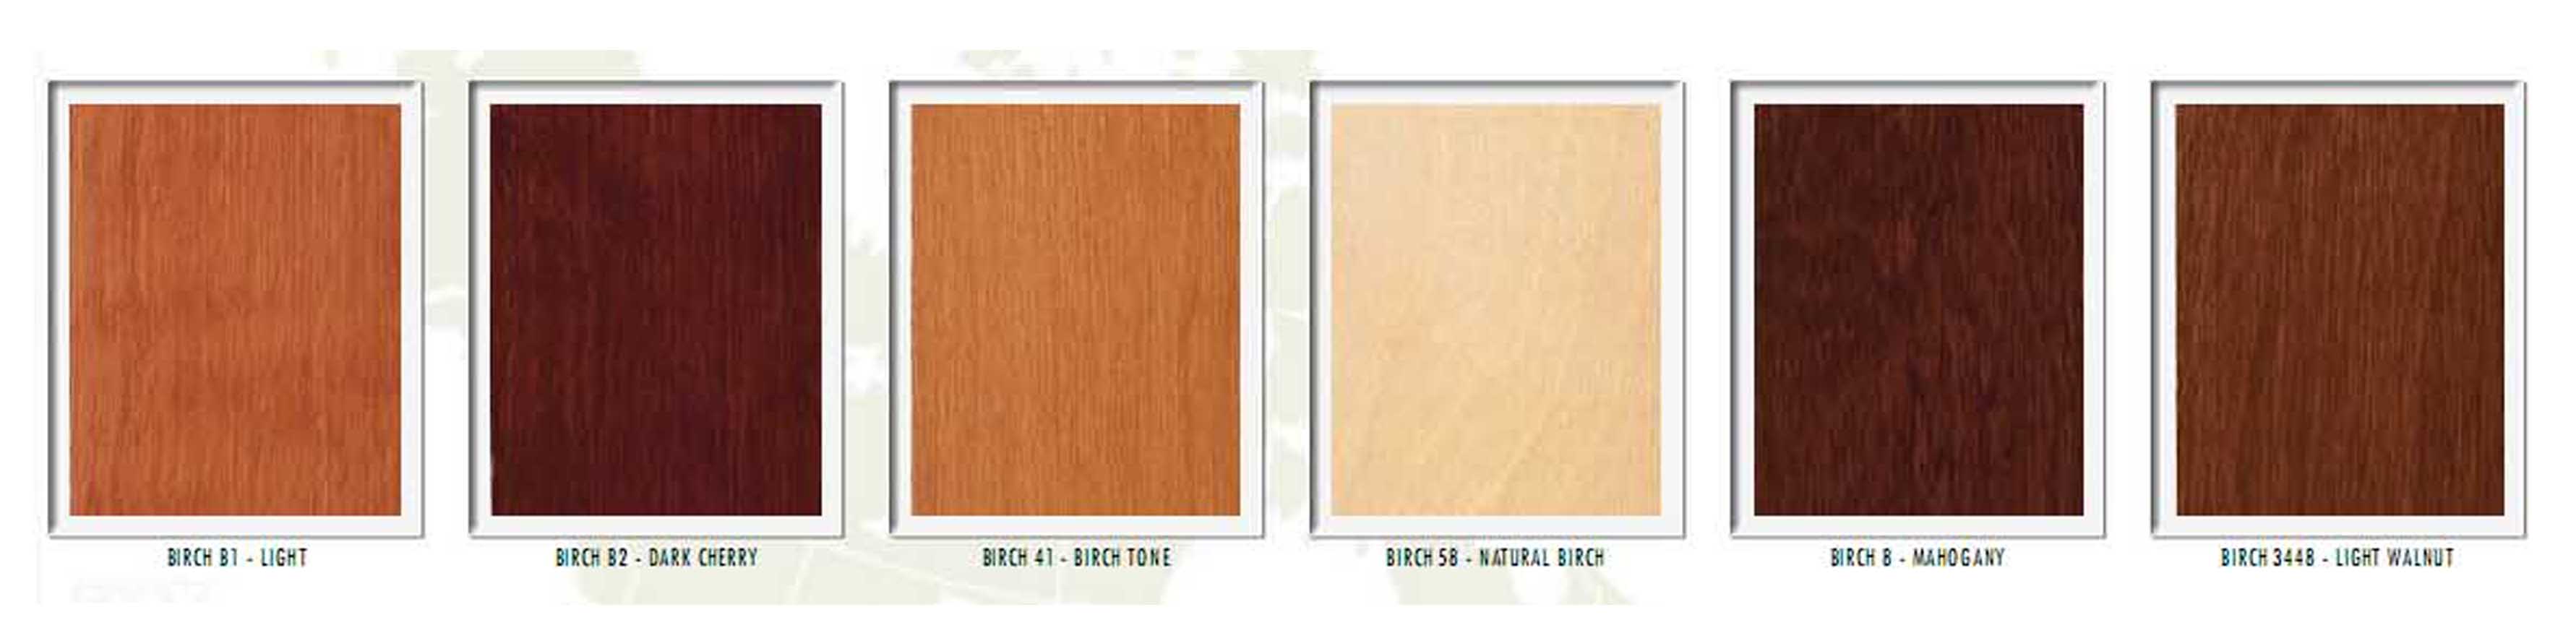 Hale Manufacturing Birch Finishes